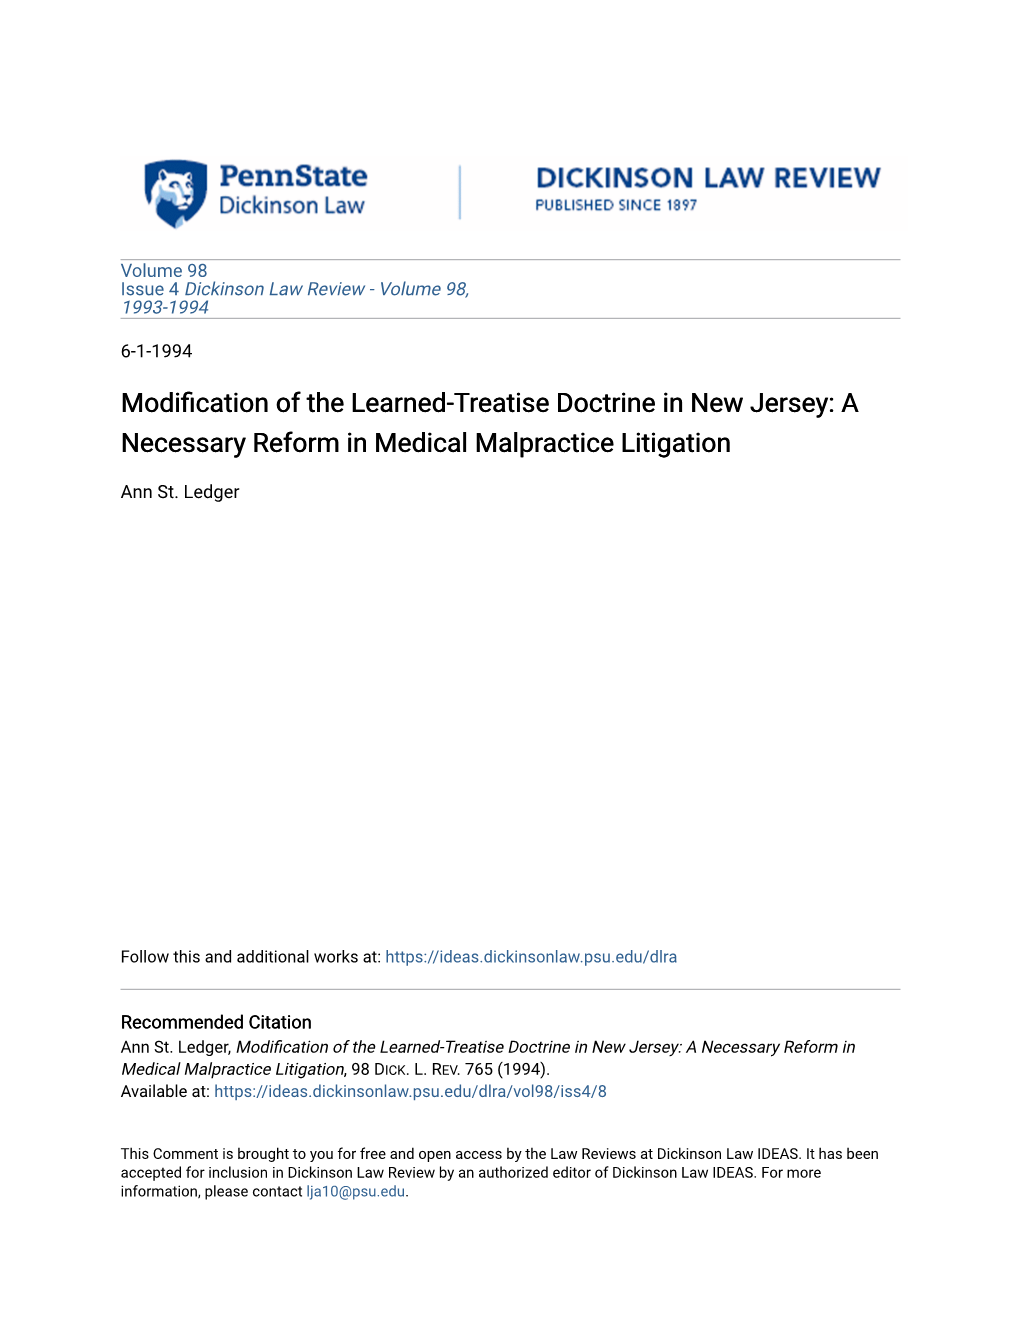 Modification of the Learned-Treatise Doctrine in New Jersey: a Necessary Reform in Medical Malpractice Litigation